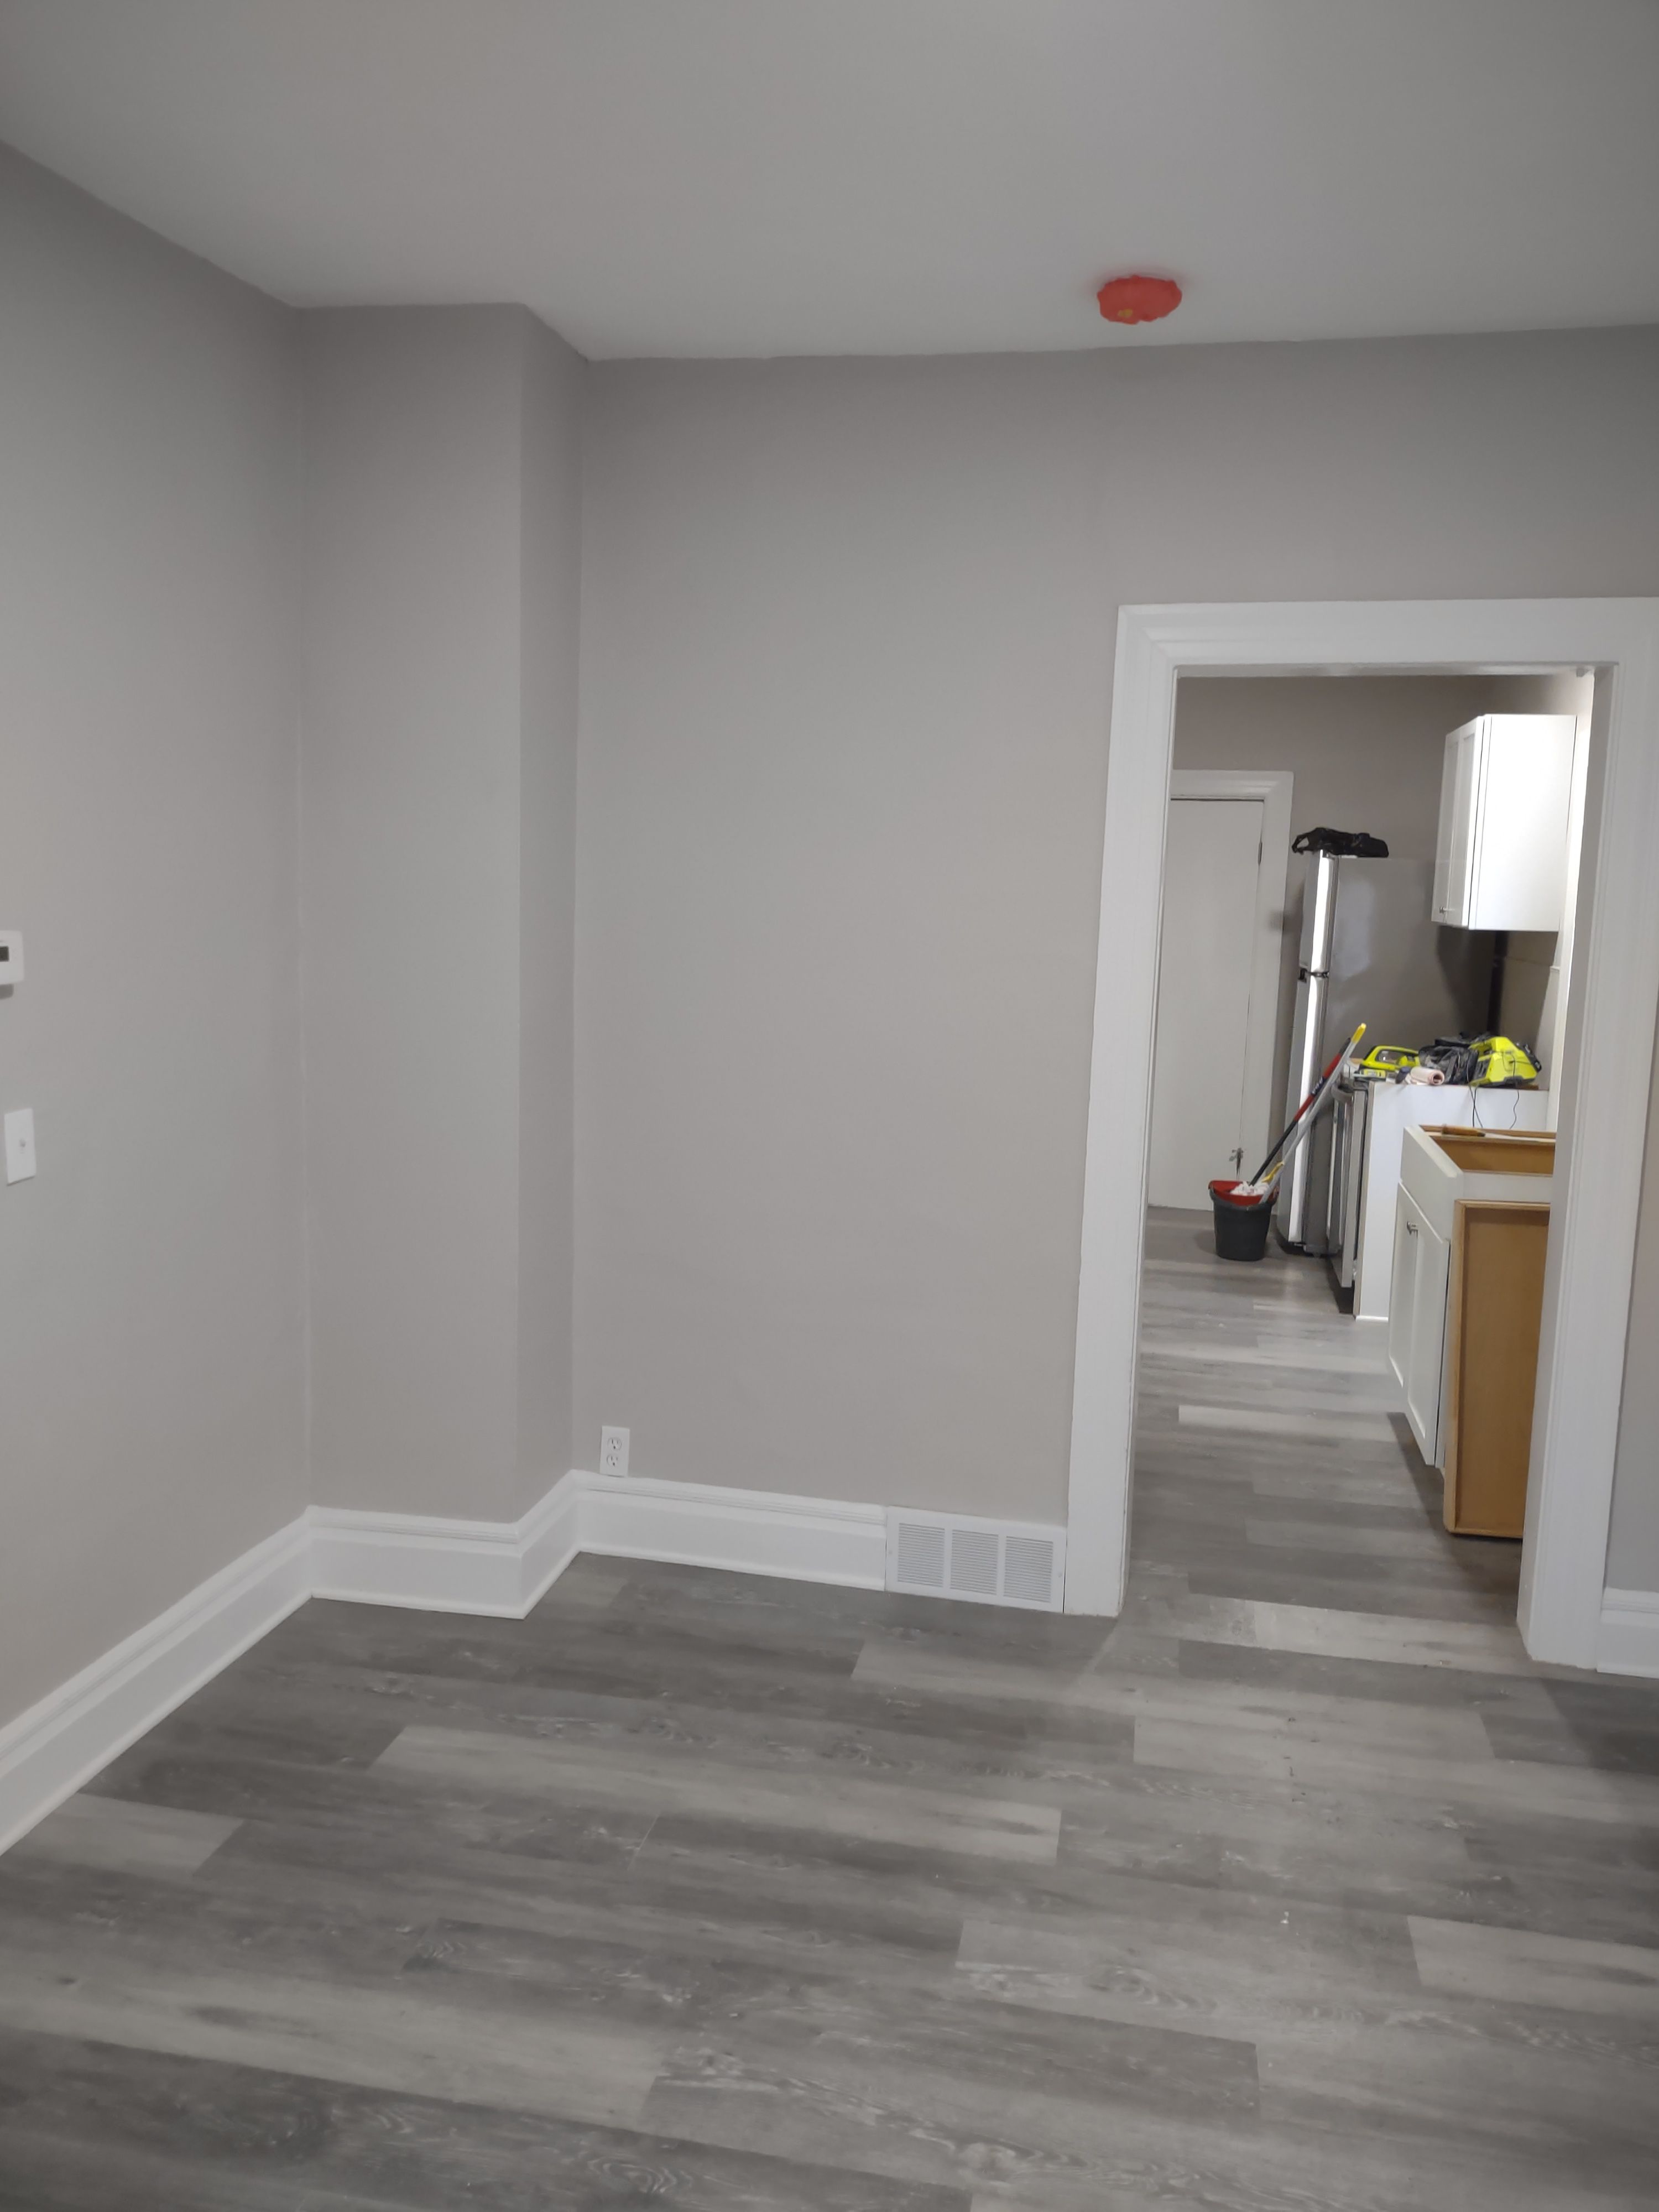  for Painless Painting And Drywall Repair LLC in Rochester, NY